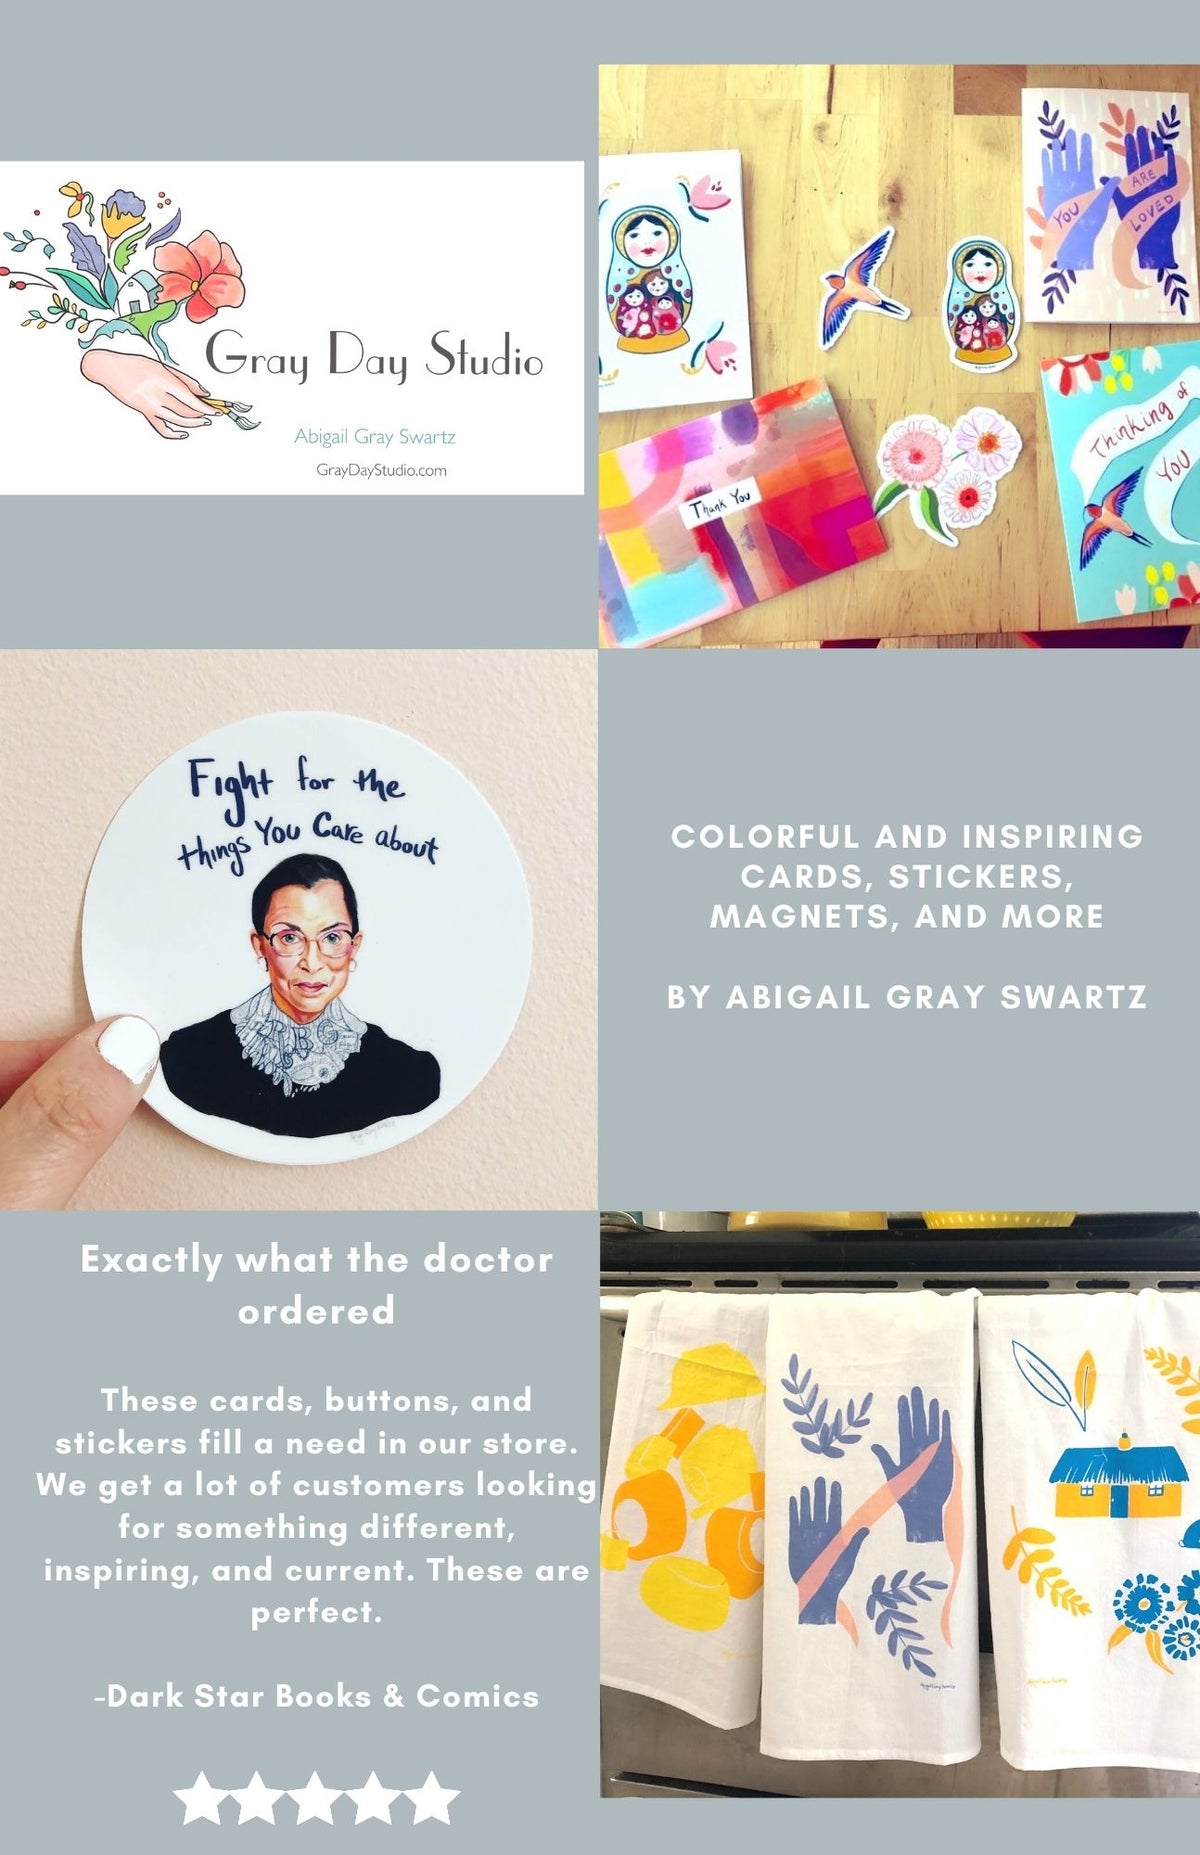 Jane Goodall STICKER, Difficult Woman quote and hand painted portrait, Stickers &amp; Magnets